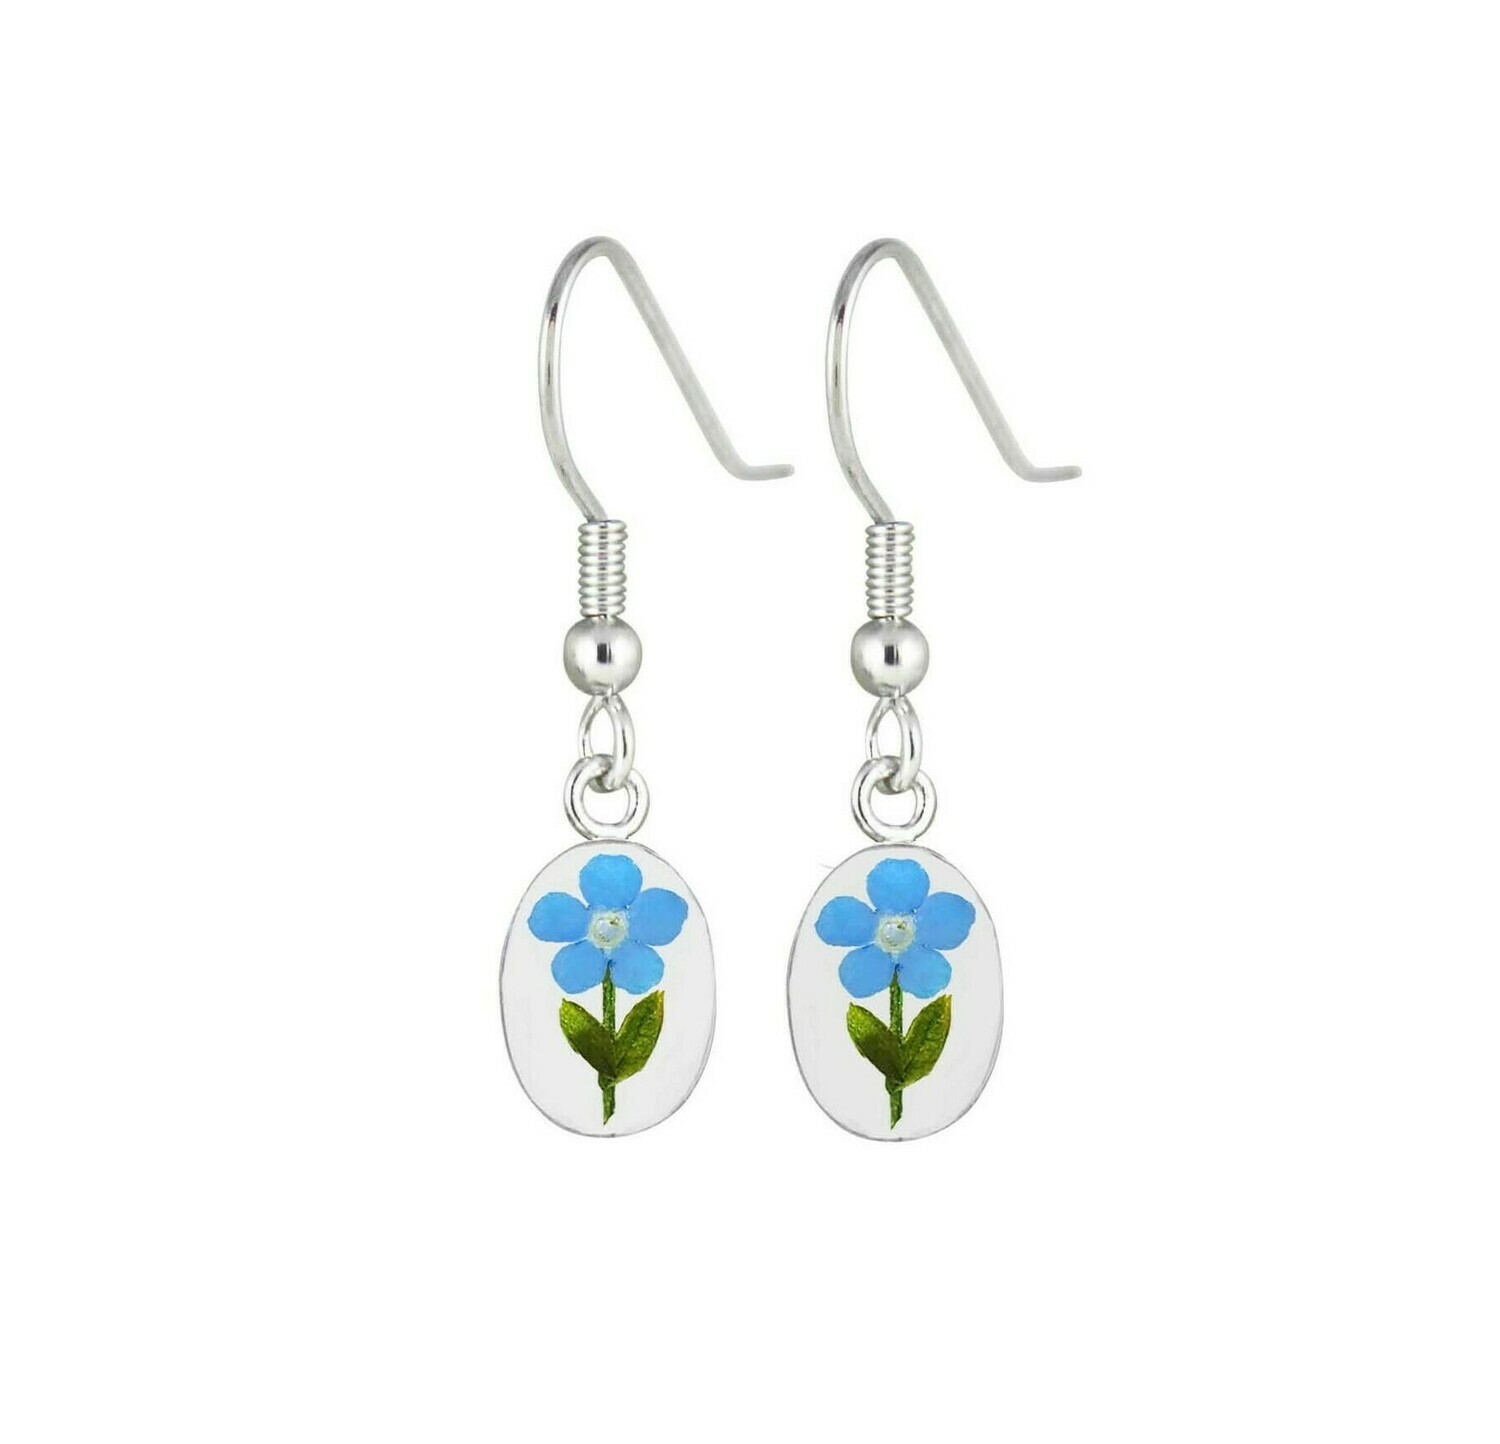 Forget-Me-Not, Small Oval Hanging Earrings, Transparent